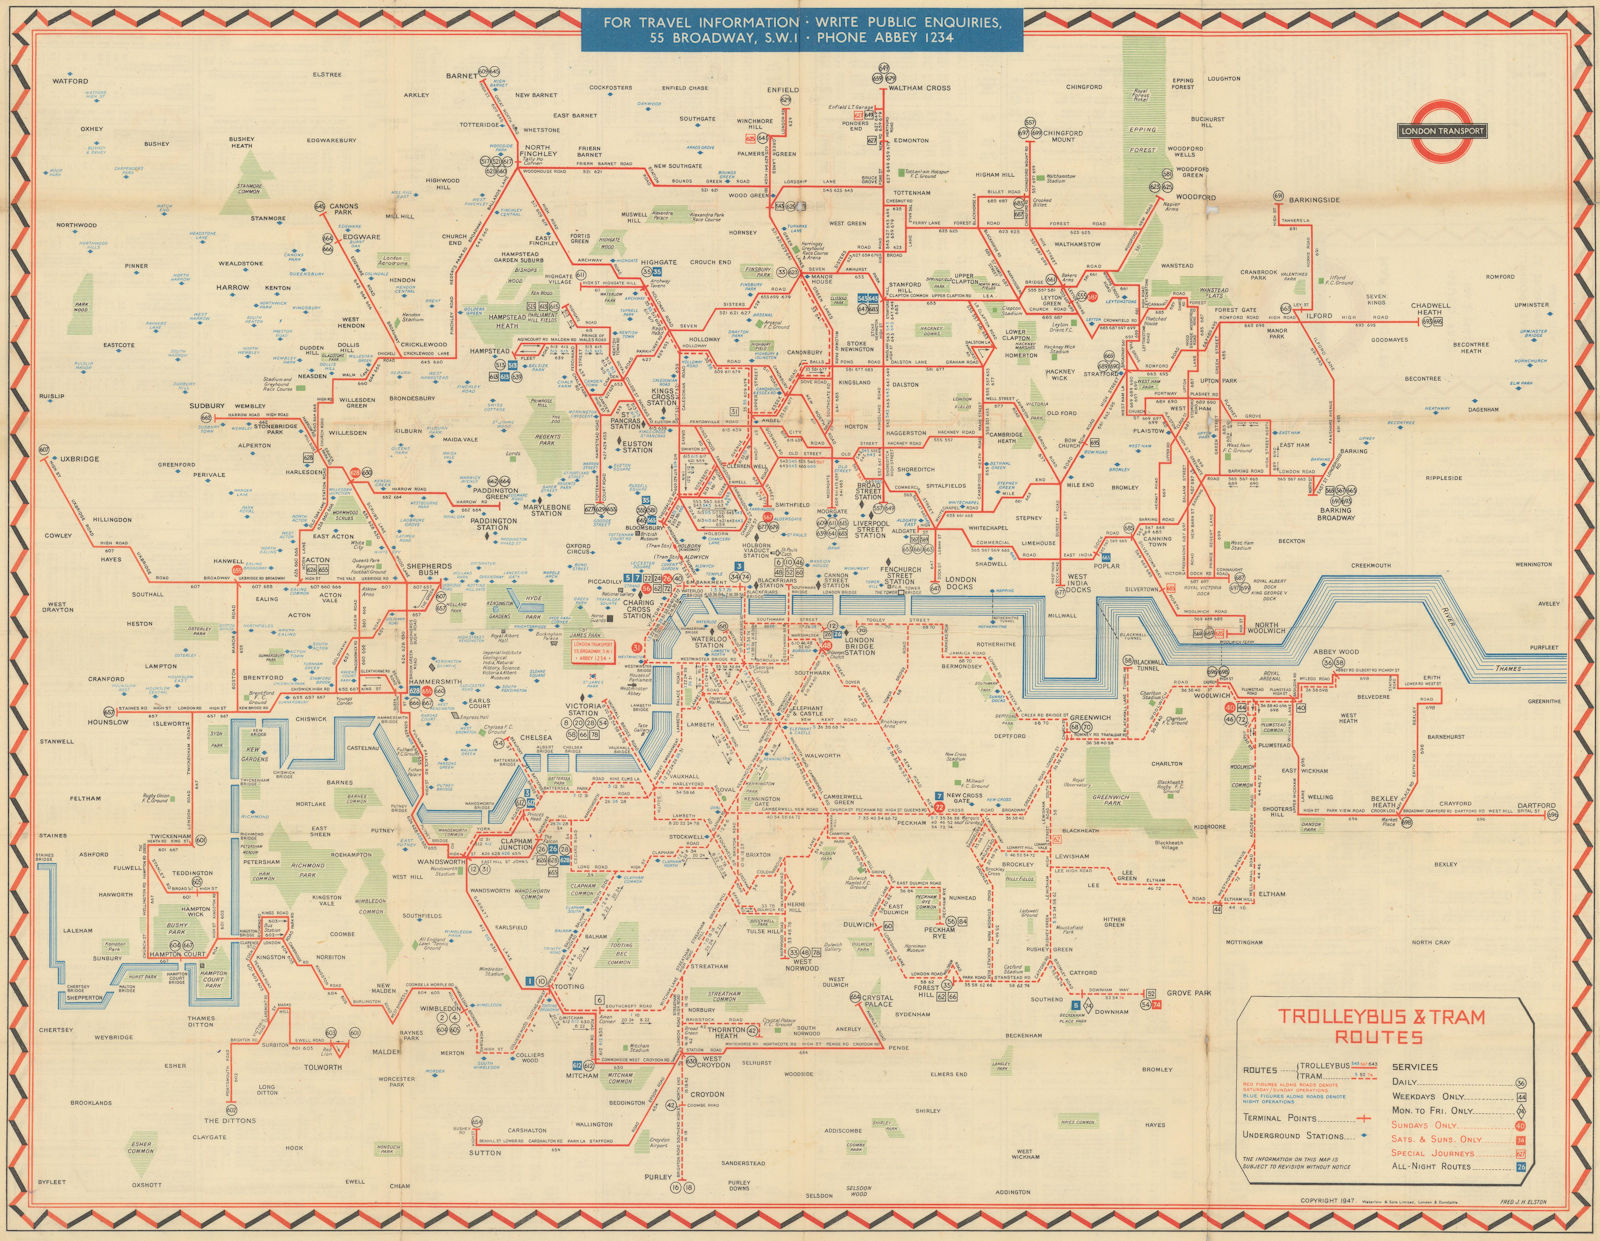 London Transport Trolleybus & Tram map of Routes. ELSTON. #2 1947 old